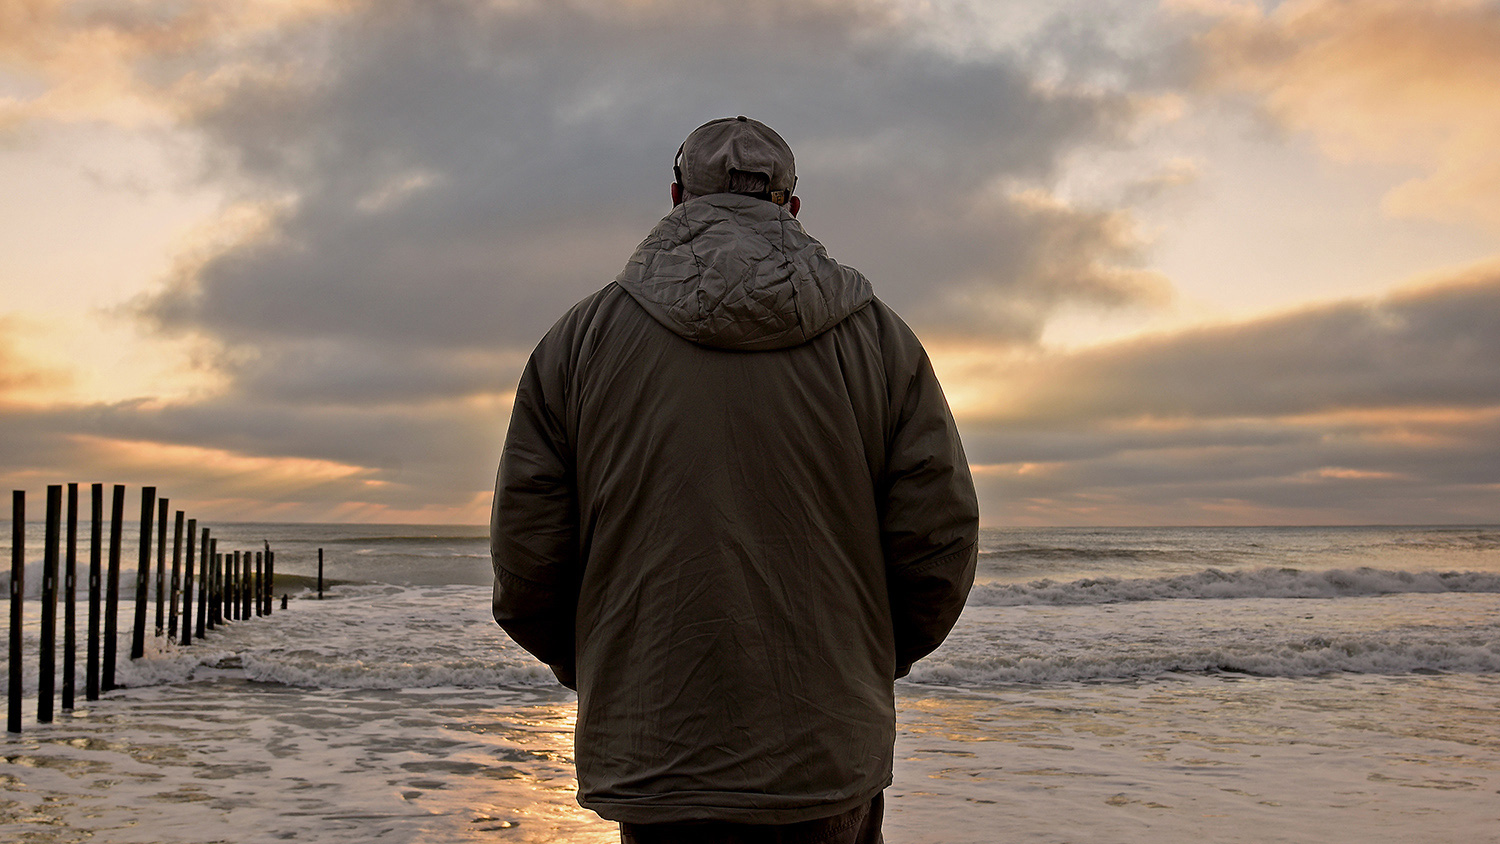 A man standing on the beach looking out at the ocean